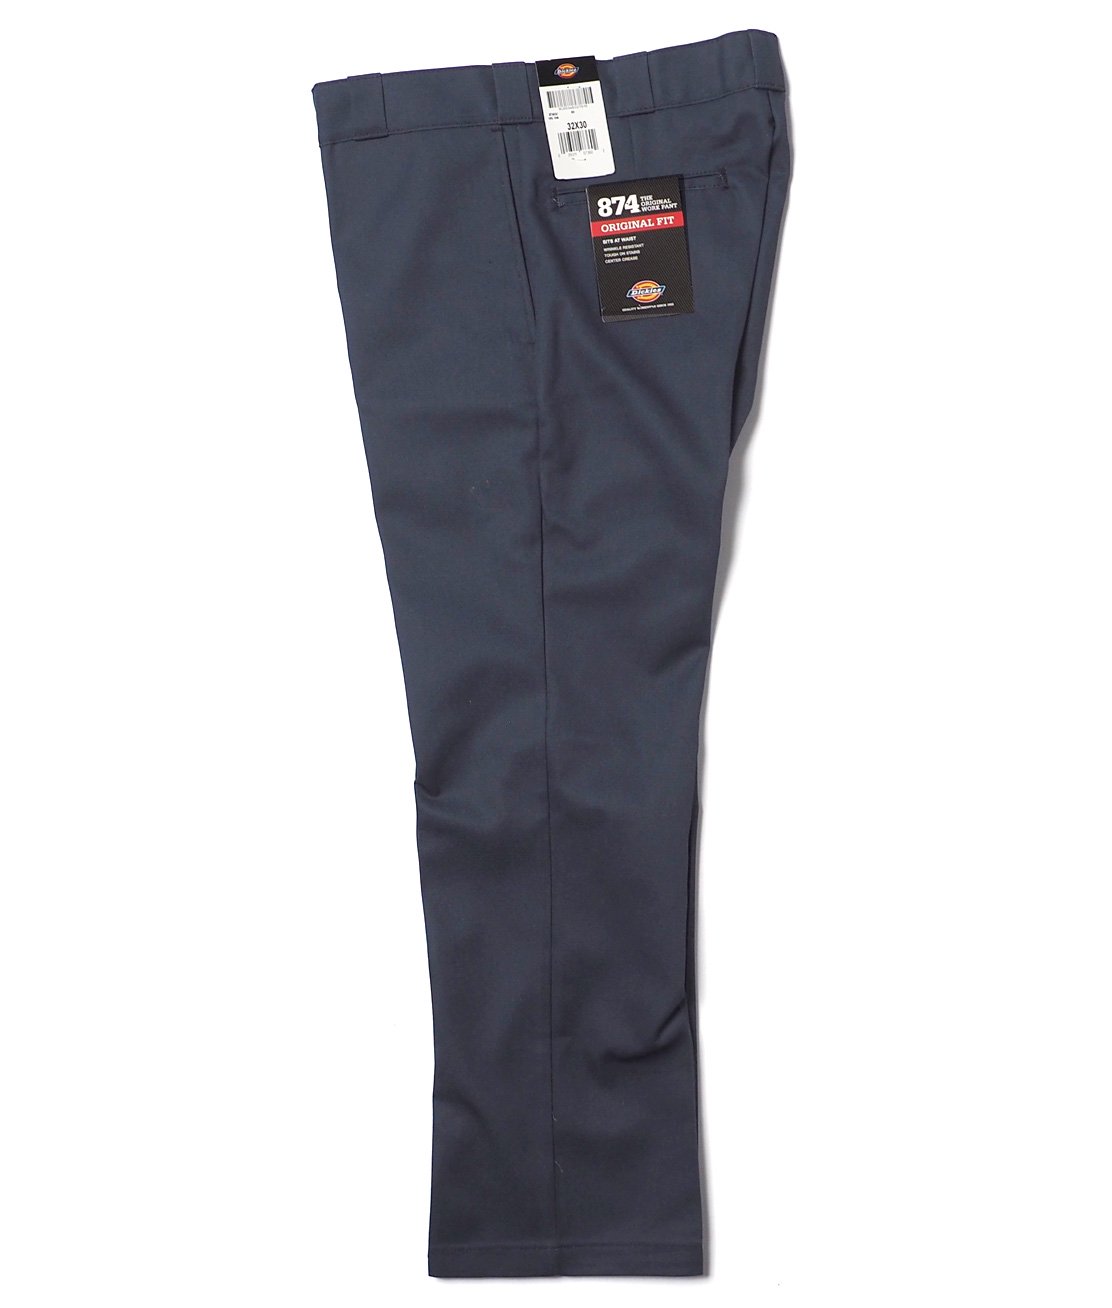 Dickies#874 ORIGINAL FIT WORK PANT - NAVY BLUE ディッキーズ ワークパンツ USモデル - HUNKY  DORY